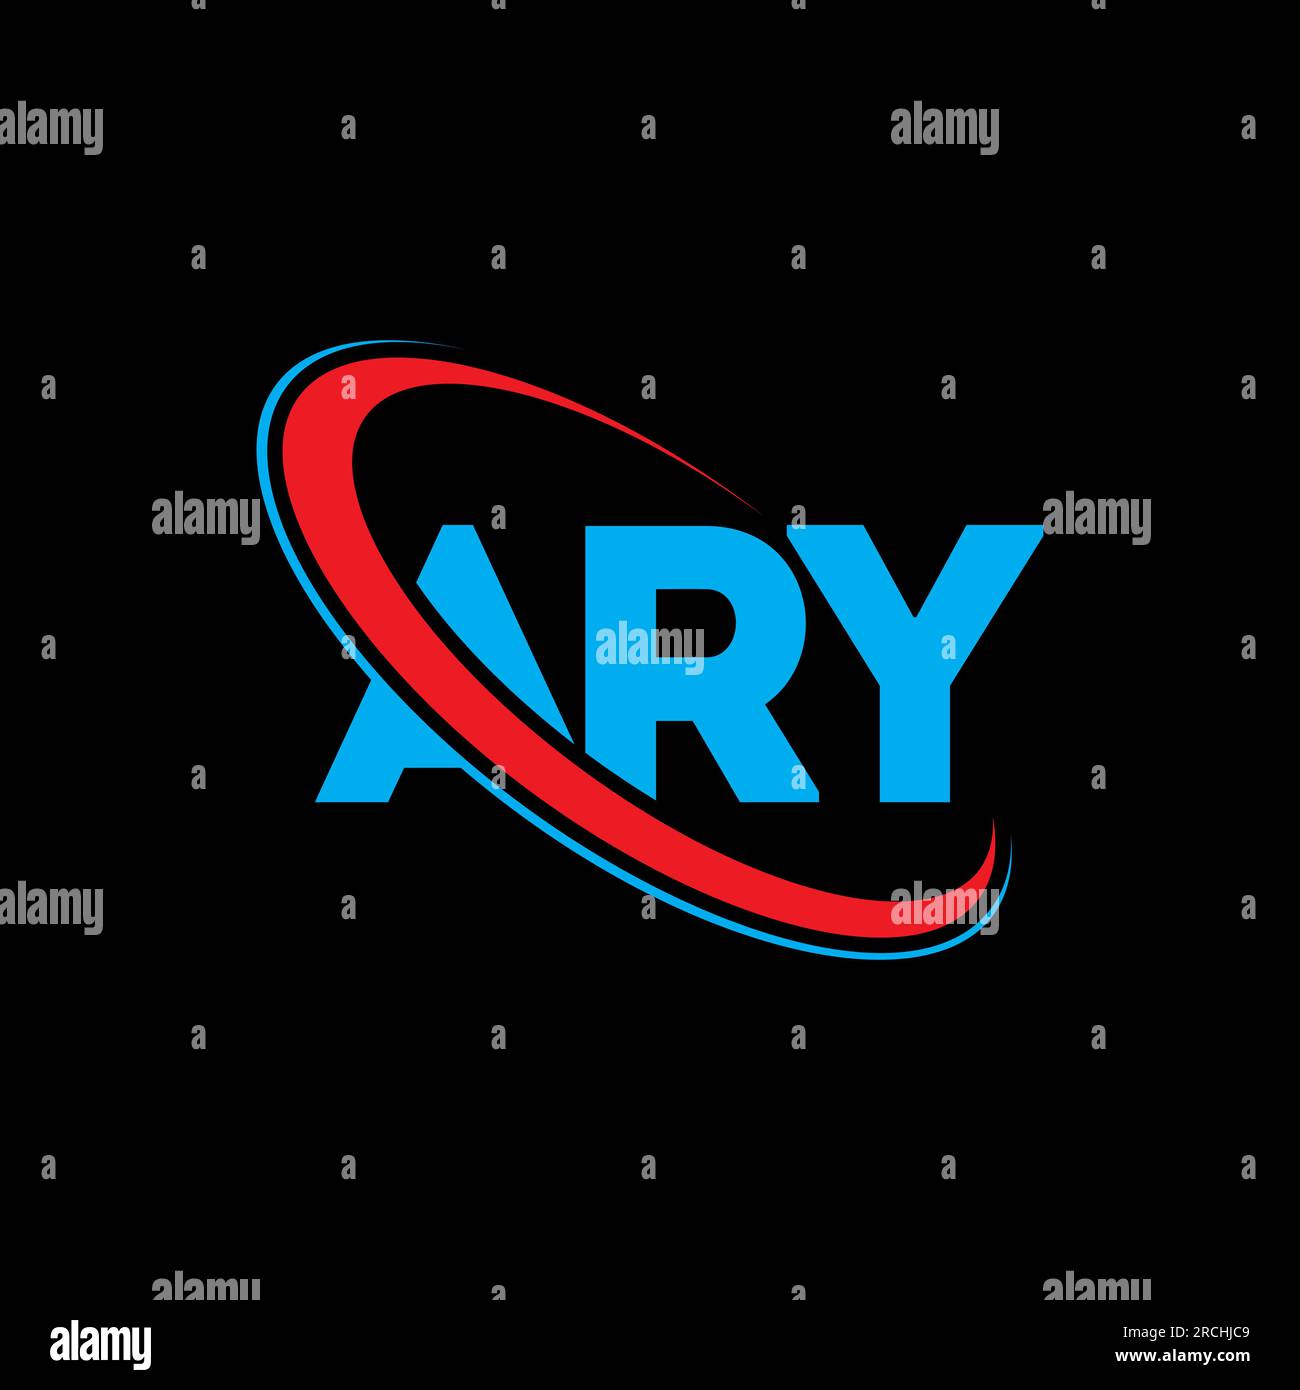 ARY logo. ARY letter. ARY letter logo design. Initials ARY logo linked with circle and uppercase monogram logo. ARY typography for technology, busines Stock Vector